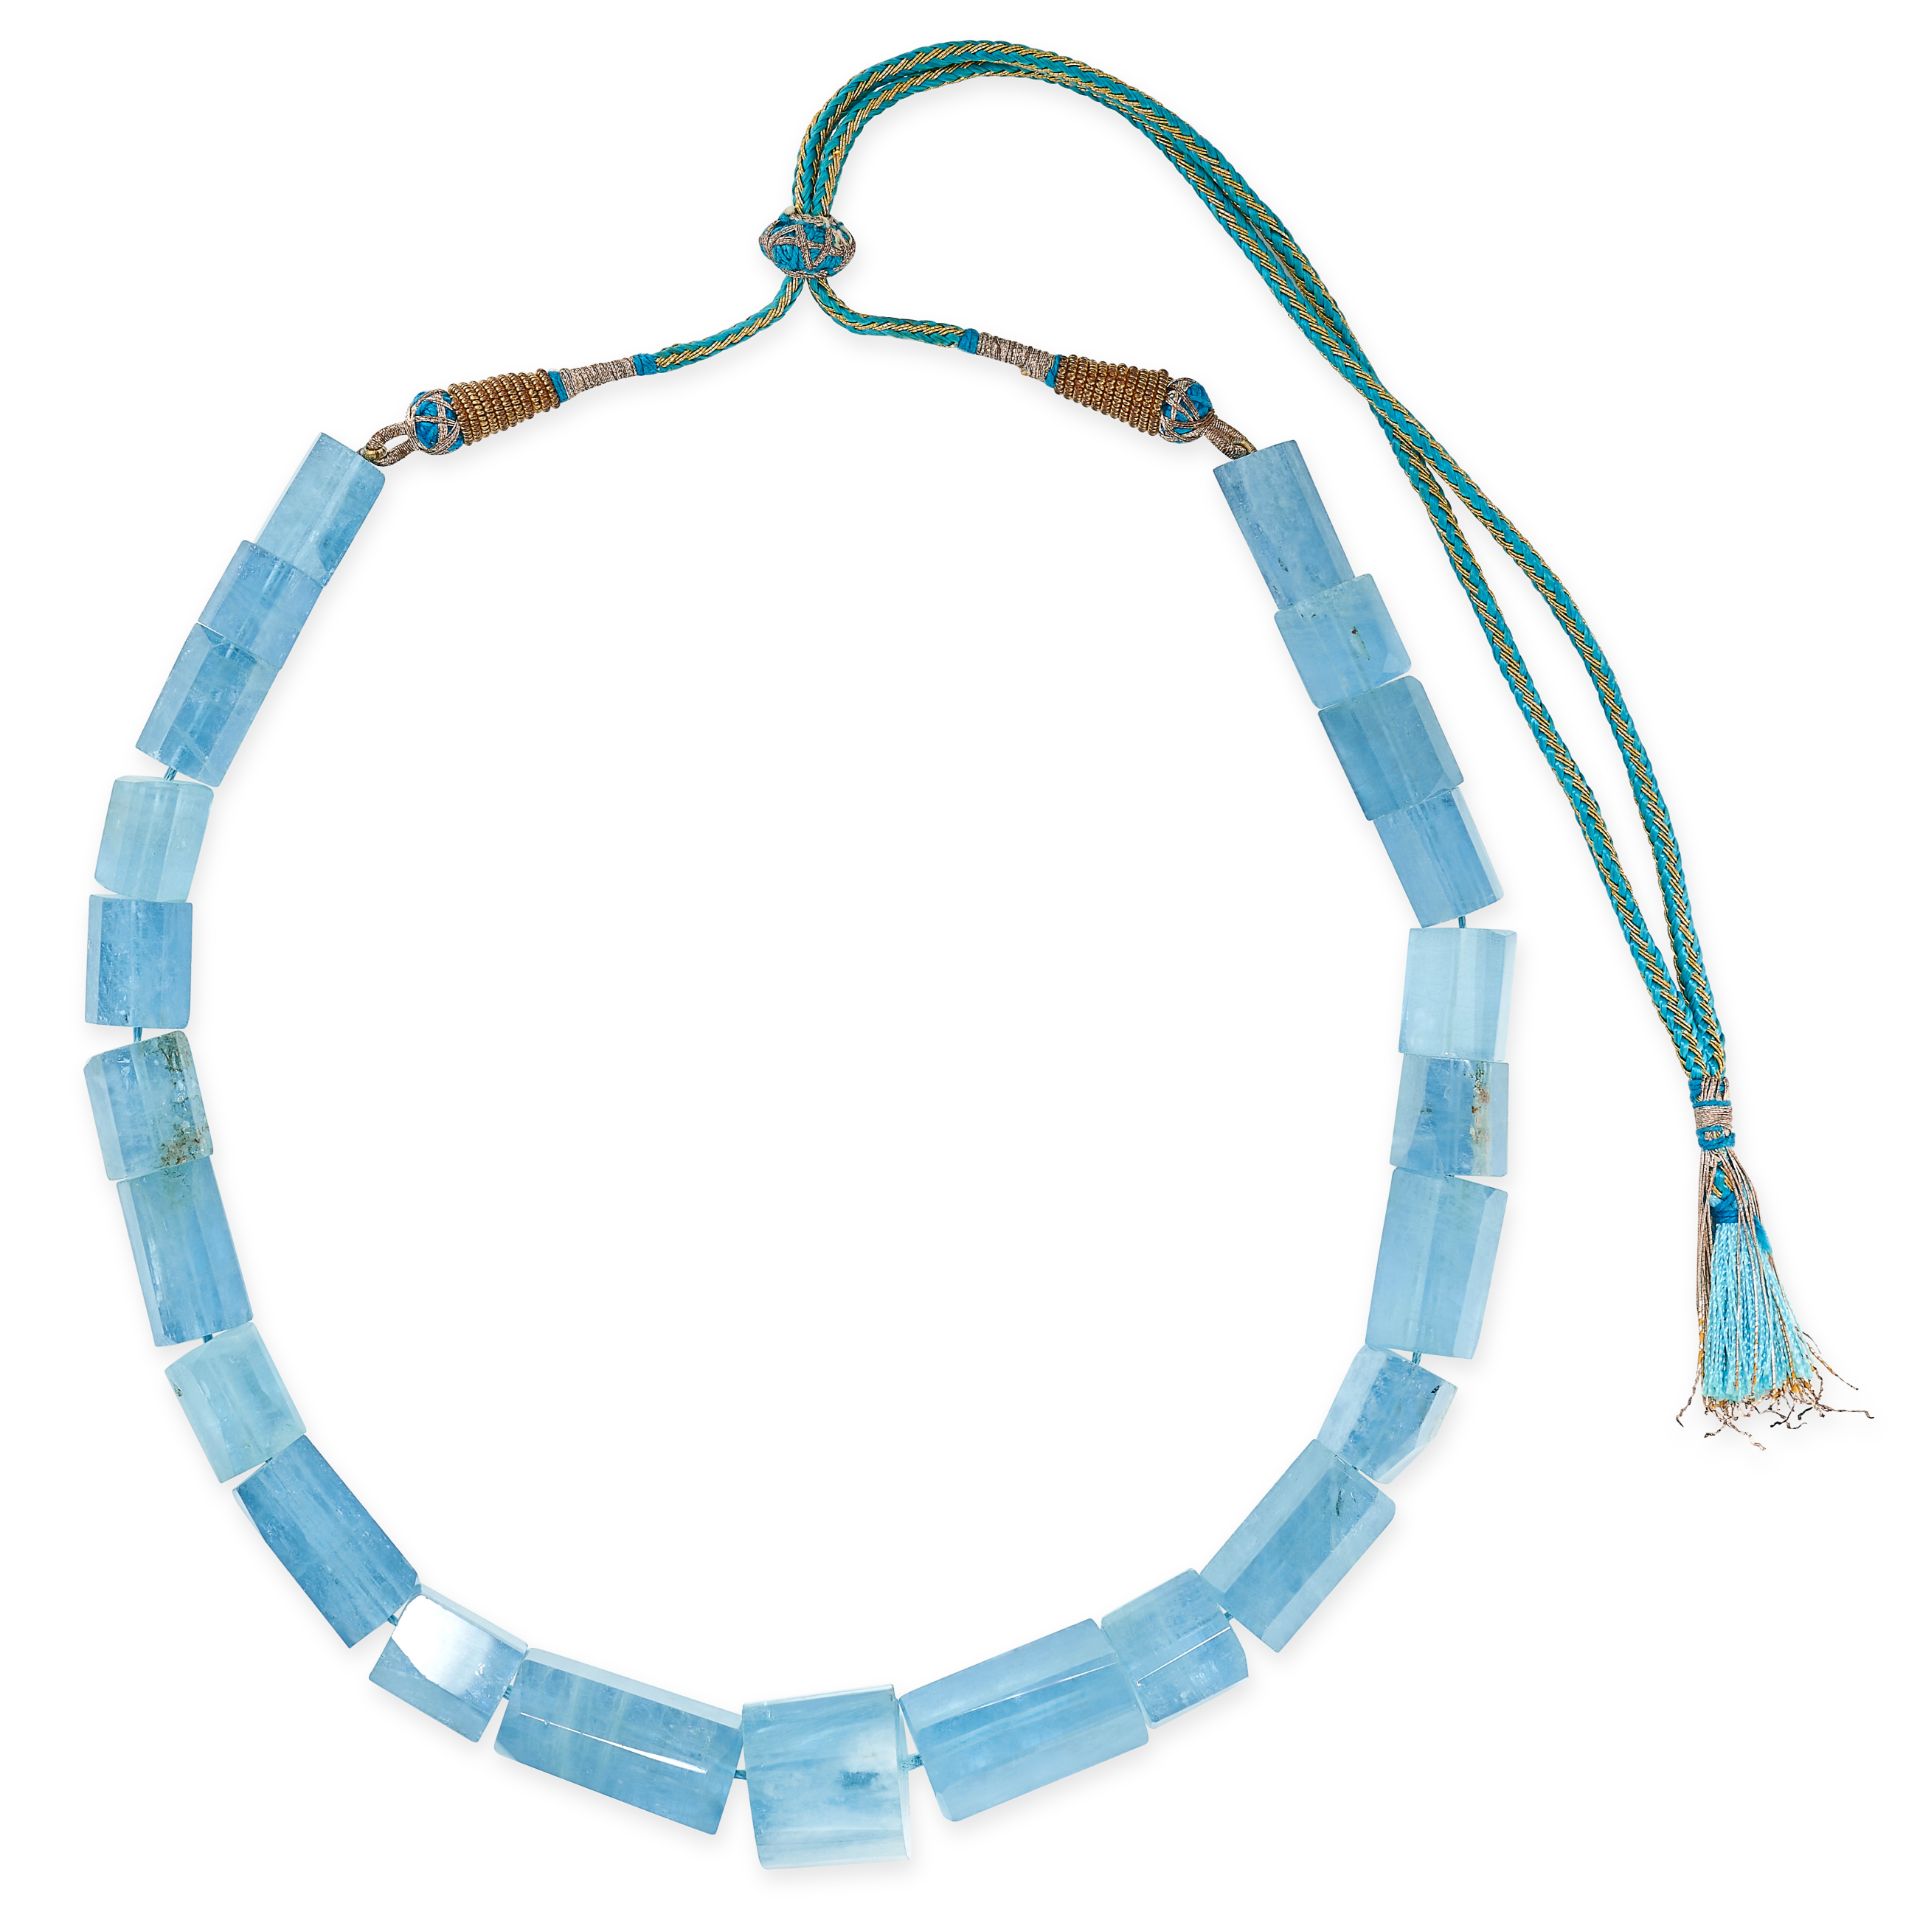 AN AQUAMARINE CRYSTAL NECKLACE comprising a row of aquamarine crystals ranging from 13.0-26.0mm,